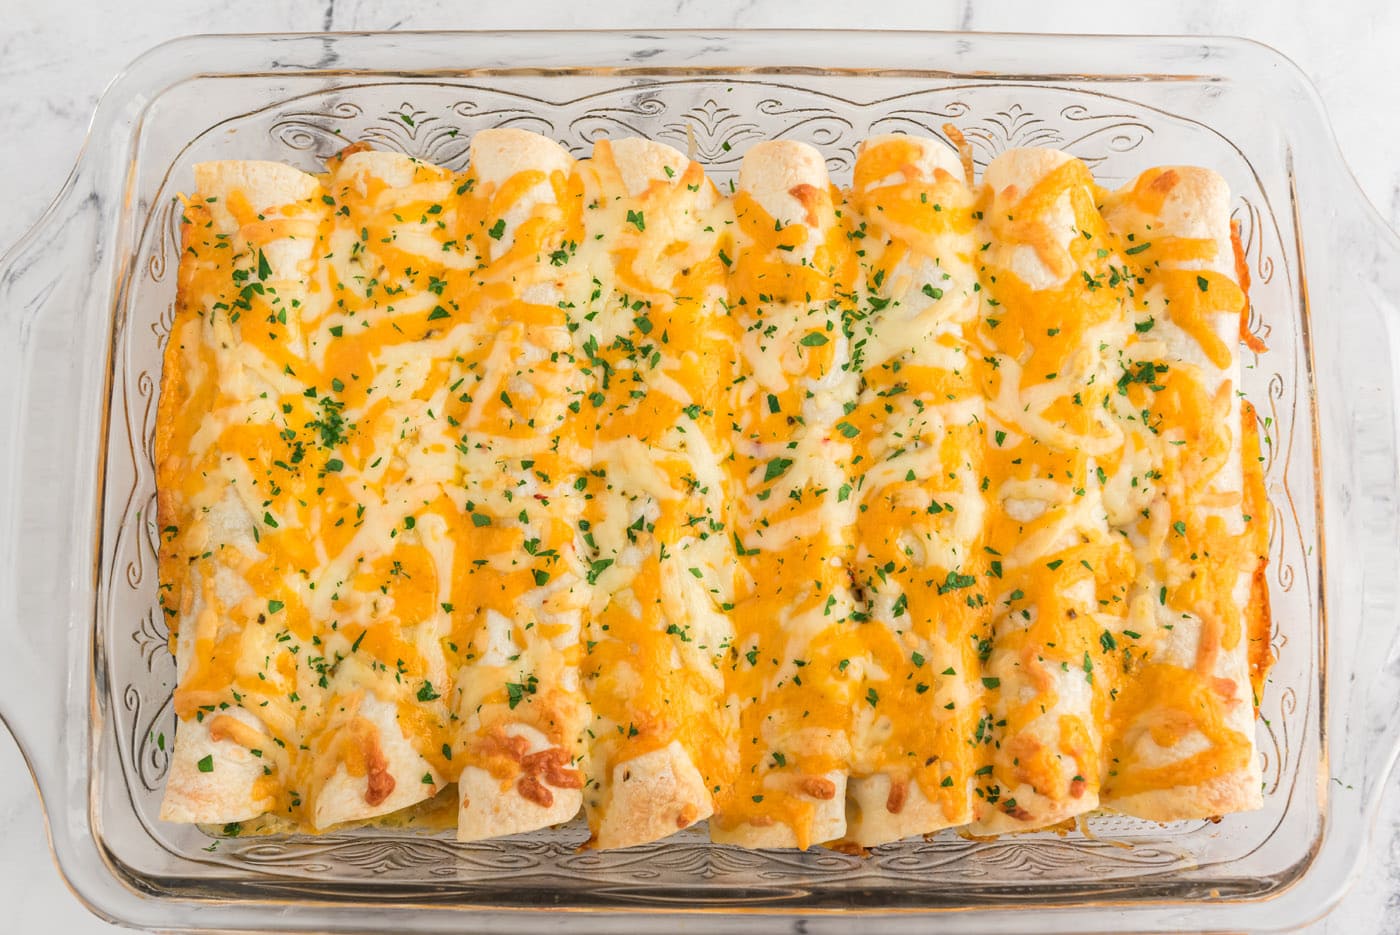 baked shredded chicken and chile enchiladas in a baking dish